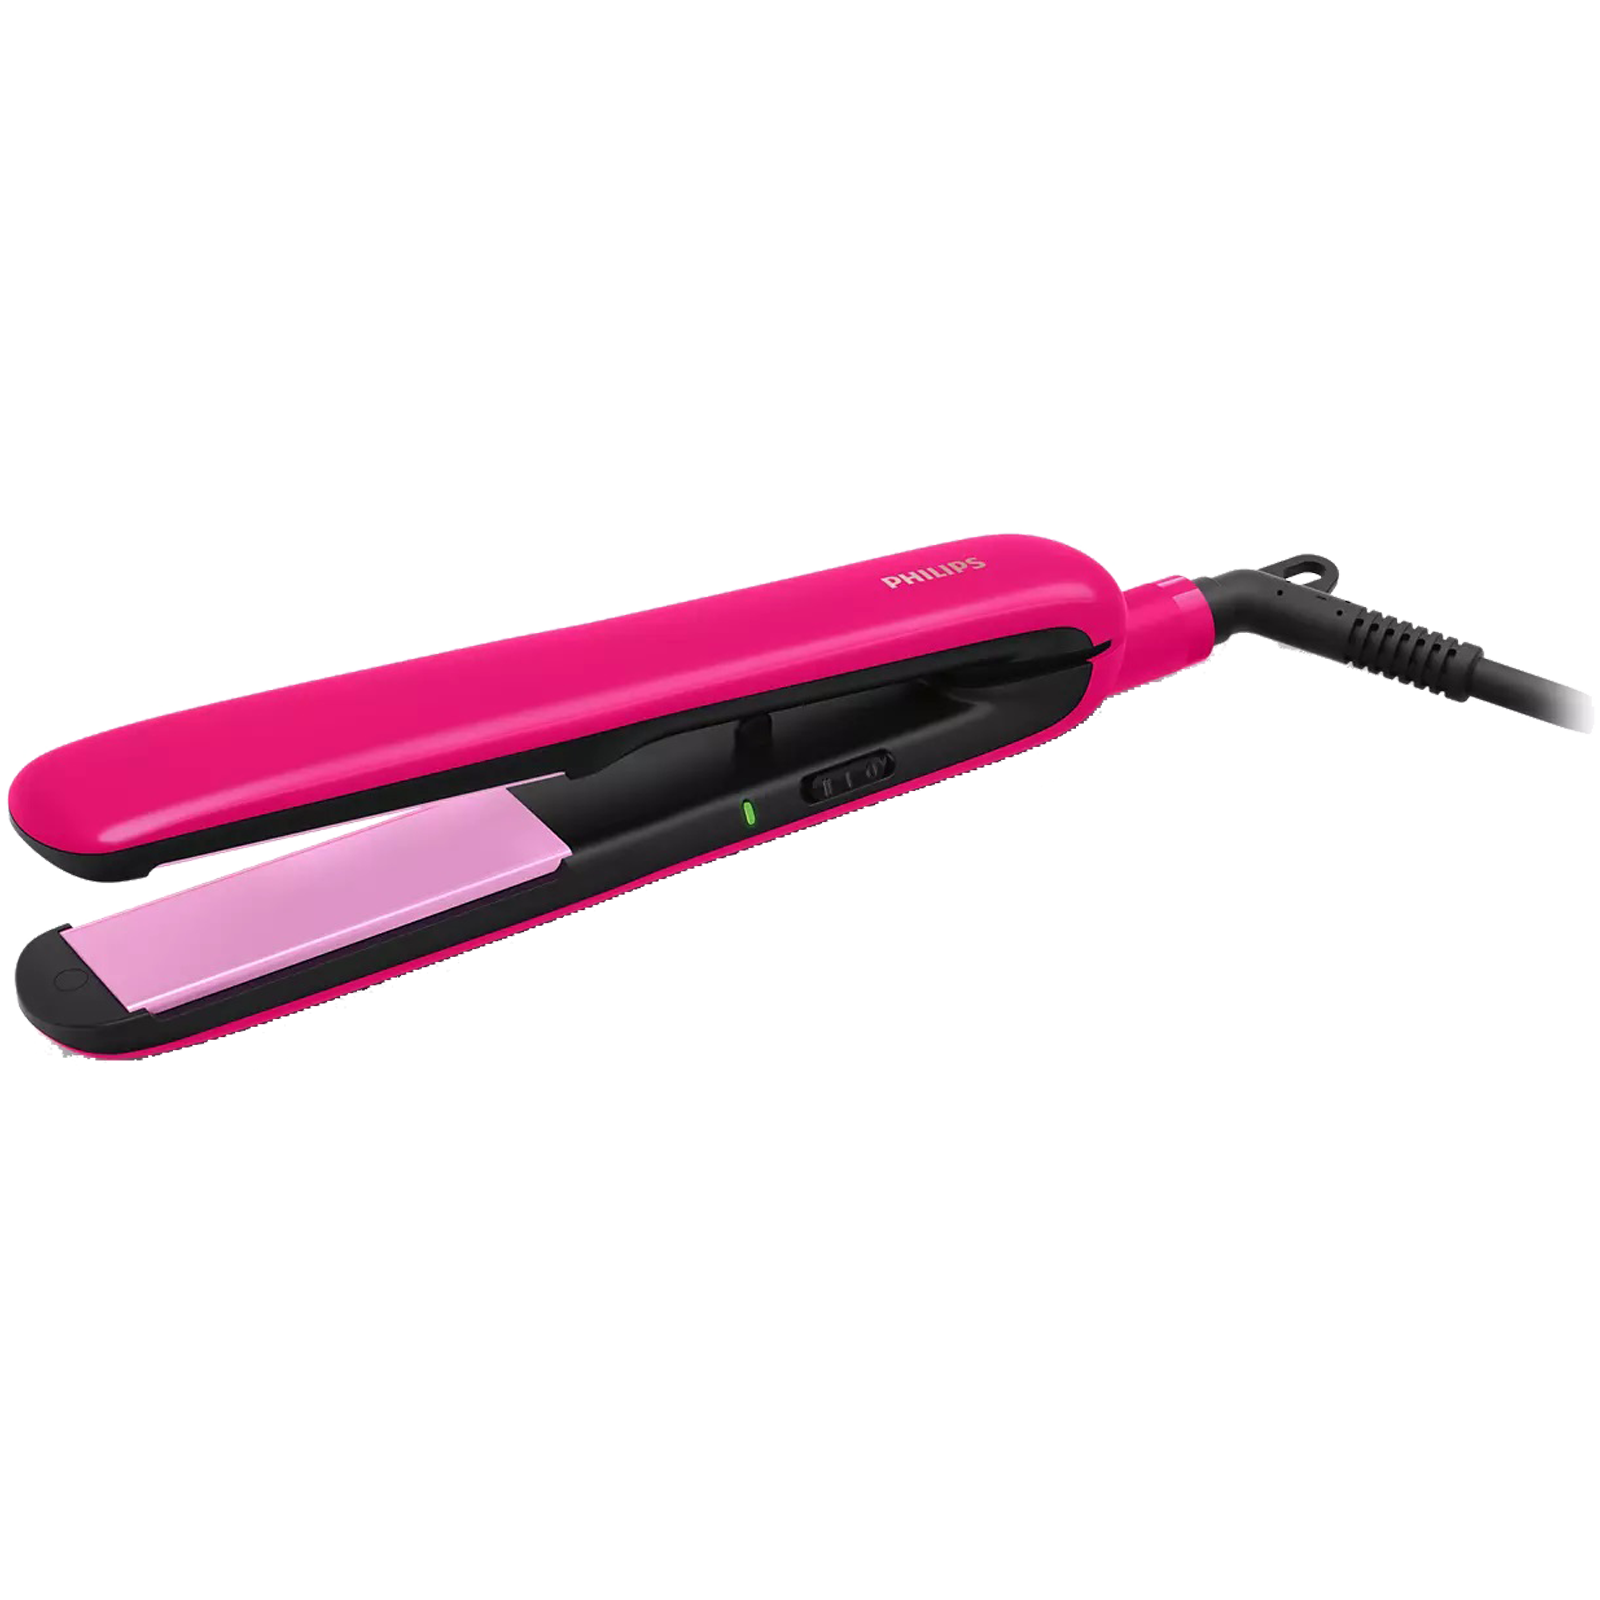 philips - philips 2000 Series Corded Straightener (SilkProtect Technology, BHS393/00, Bright Pink)